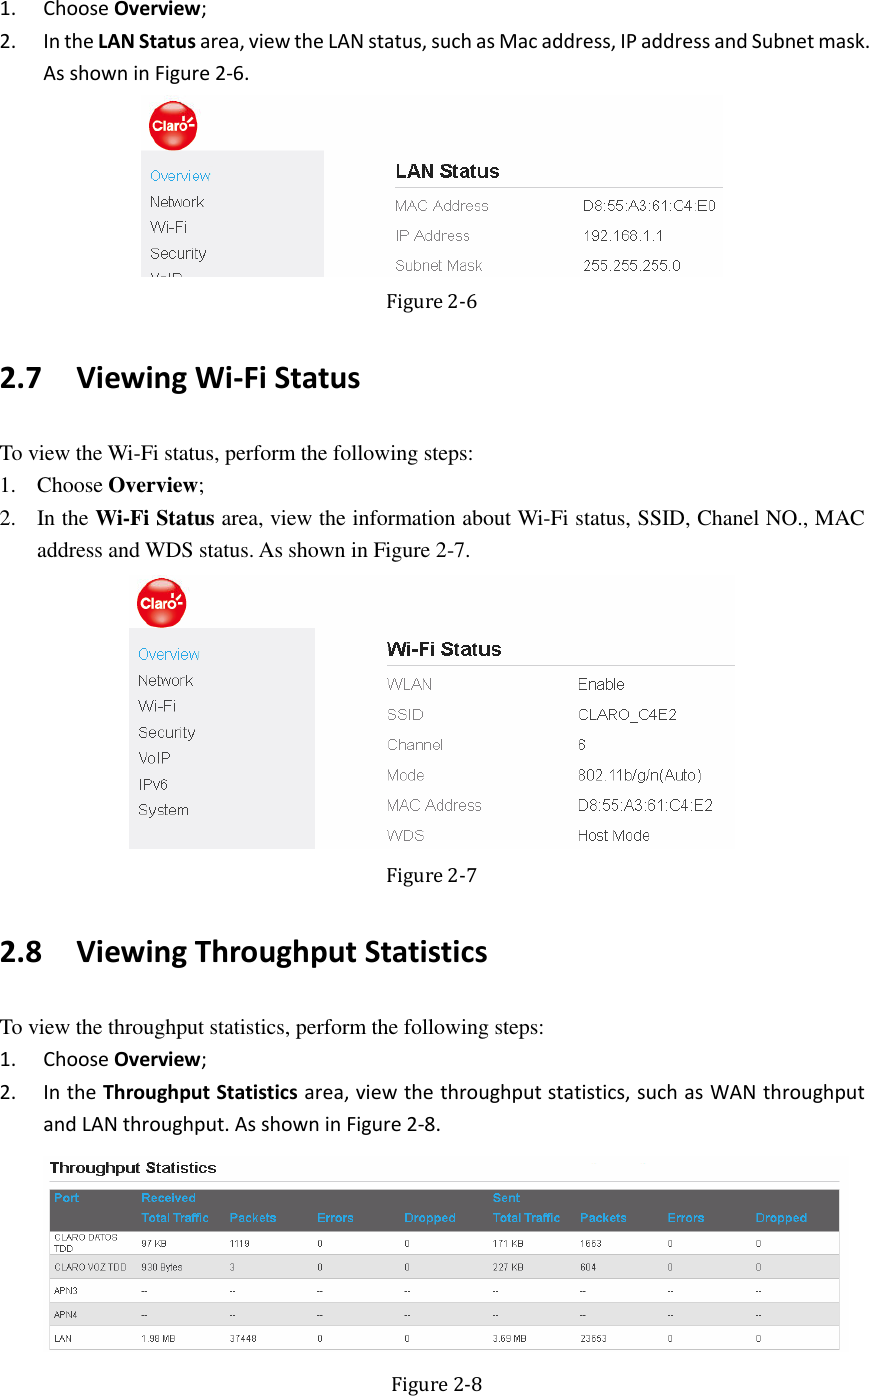   1. Choose Overview; 2. In the LAN Status area, view the LAN status, such as Mac address, IP address and Subnet mask. As shown in Figure 2-6.  Figure 2-6 2.7   Viewing Wi-Fi Status To view the Wi-Fi status, perform the following steps: 1. Choose Overview; 2. In the Wi-Fi Status area, view the information about Wi-Fi status, SSID, Chanel NO., MAC address and WDS status. As shown in Figure 2-7.  Figure 2-7 2.8   Viewing Throughput Statistics To view the throughput statistics, perform the following steps: 1. Choose Overview; 2. In the Throughput Statistics area, view the throughput statistics, such as WAN throughput and LAN throughput. As shown in Figure 2-8.    Figure 2-8 